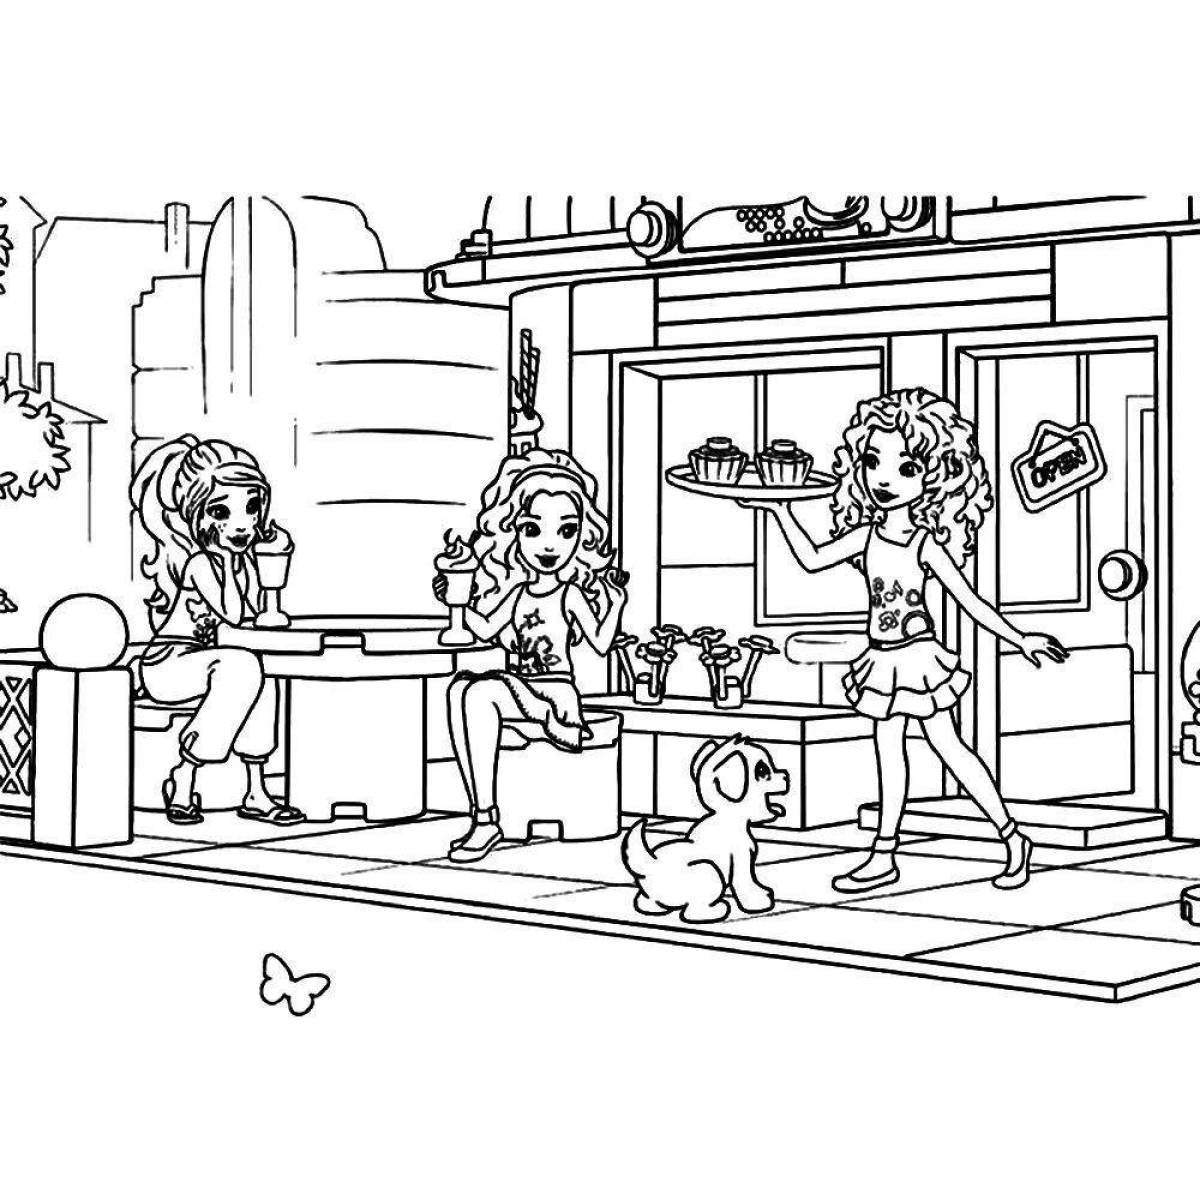 Delightful lego friends coloring pages